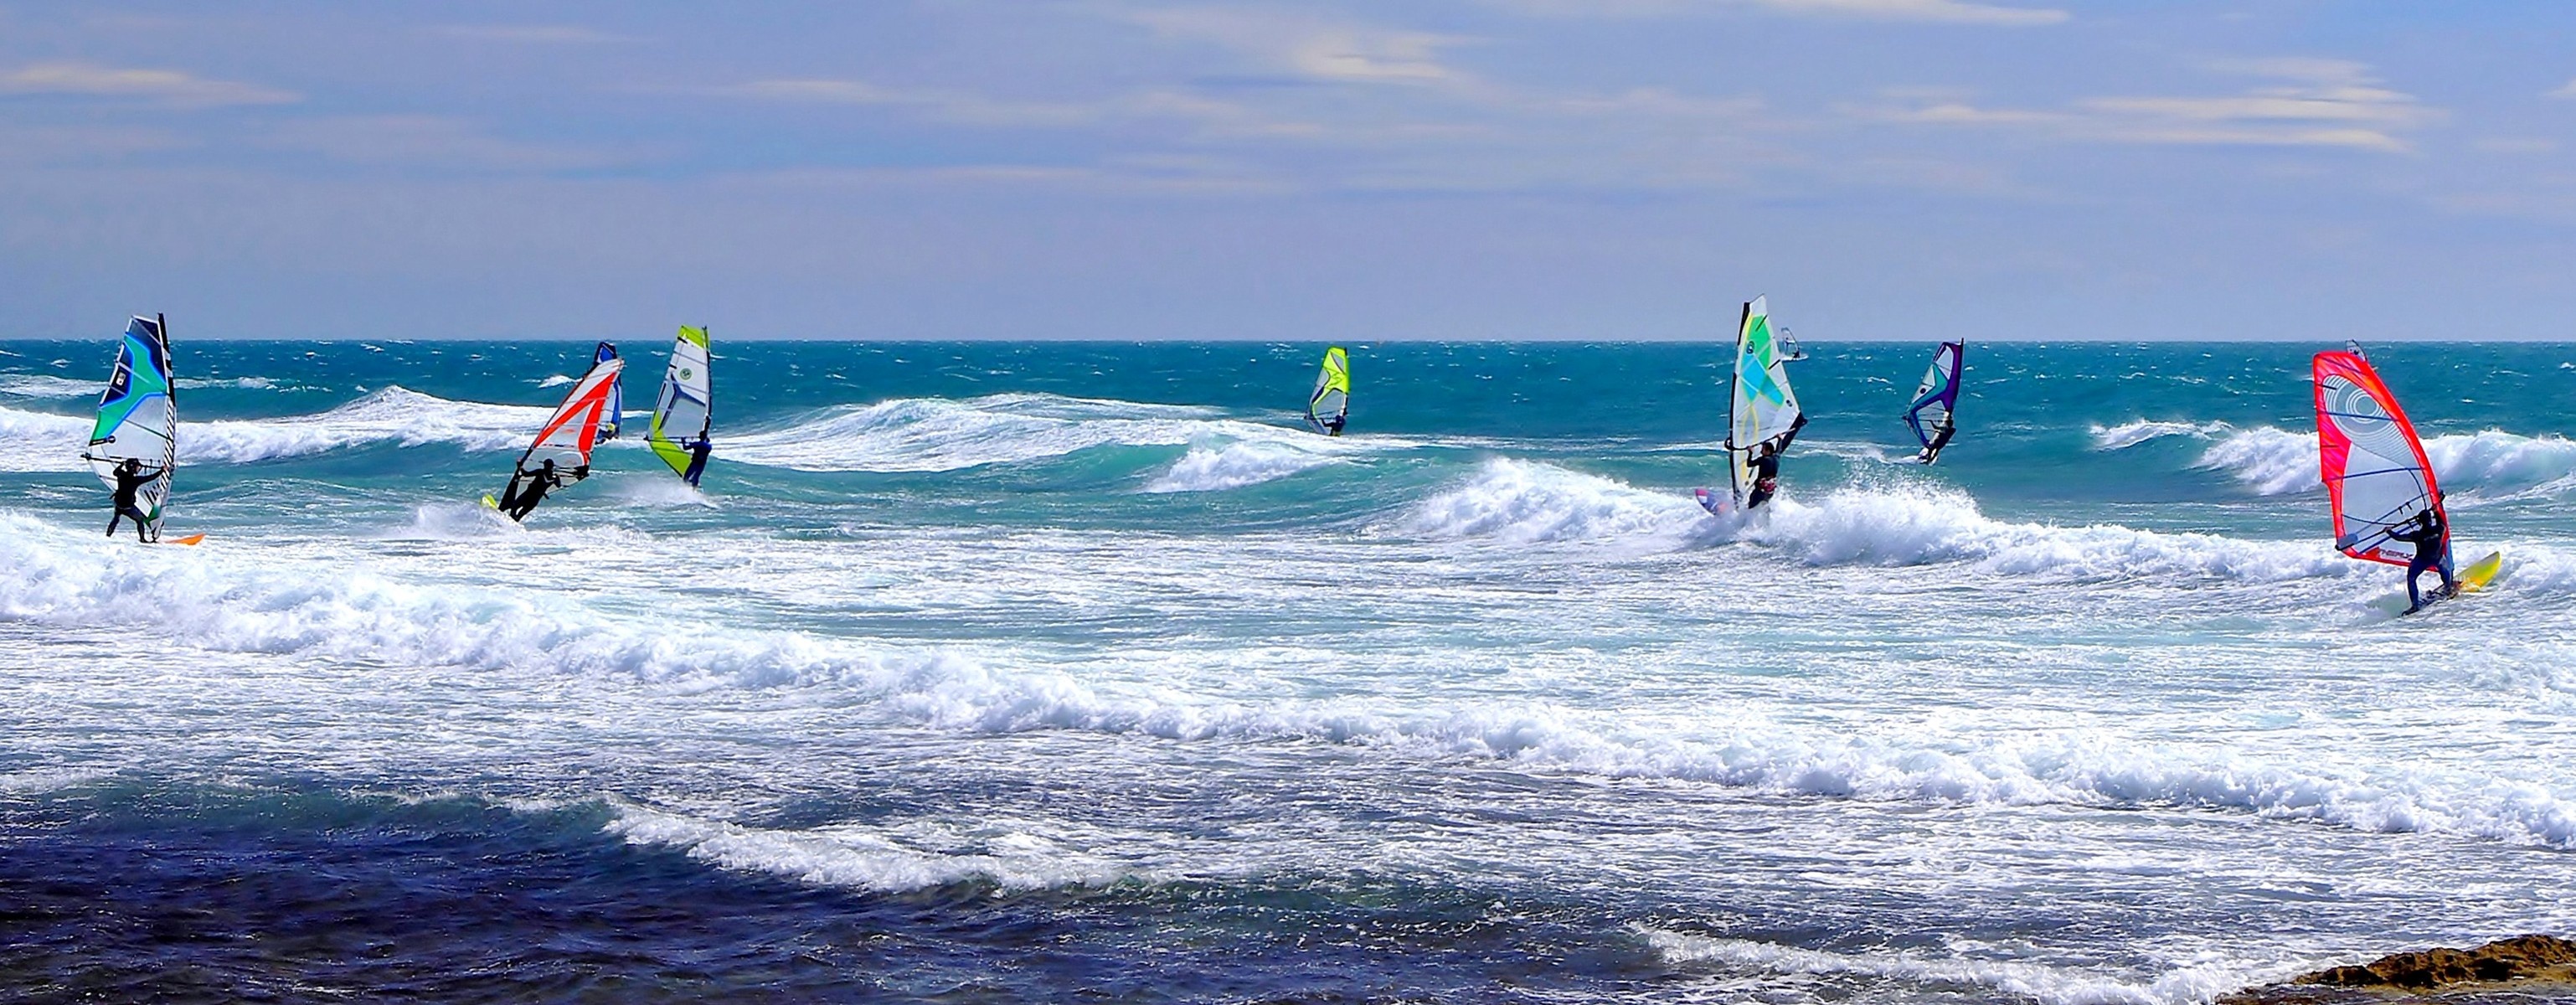 Windsurfing: Sailing and Surfing, Olympic Summer Sport, Windfoiling, Wingfoiling and Kiteboarding. 3080x1200 Dual Screen Background.